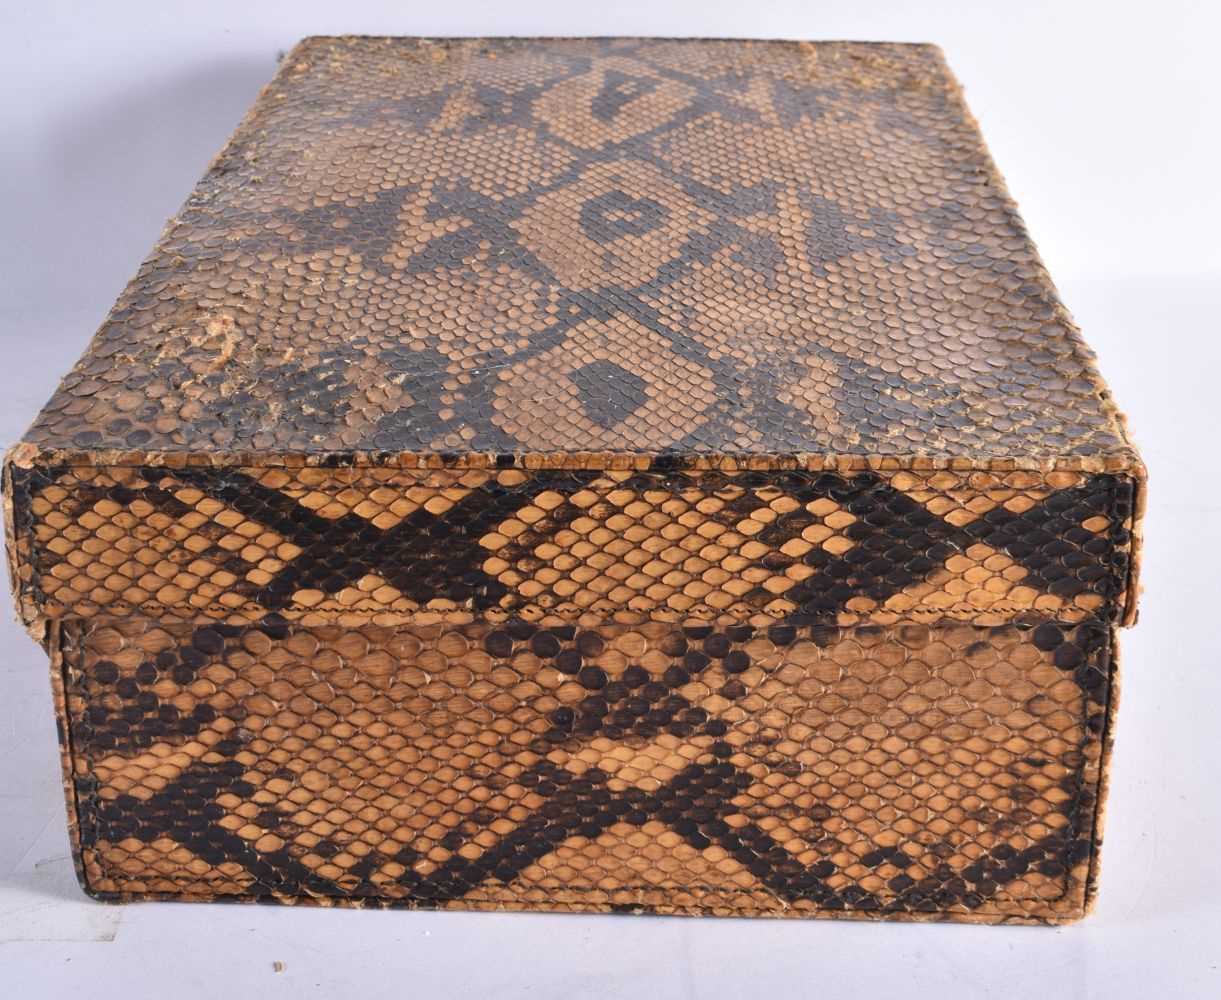 AN ANTIQUE TAXIDERMY WORKED SNAKE SKIN SUITCASE. 44 cm x 30 cm. - Image 4 of 7